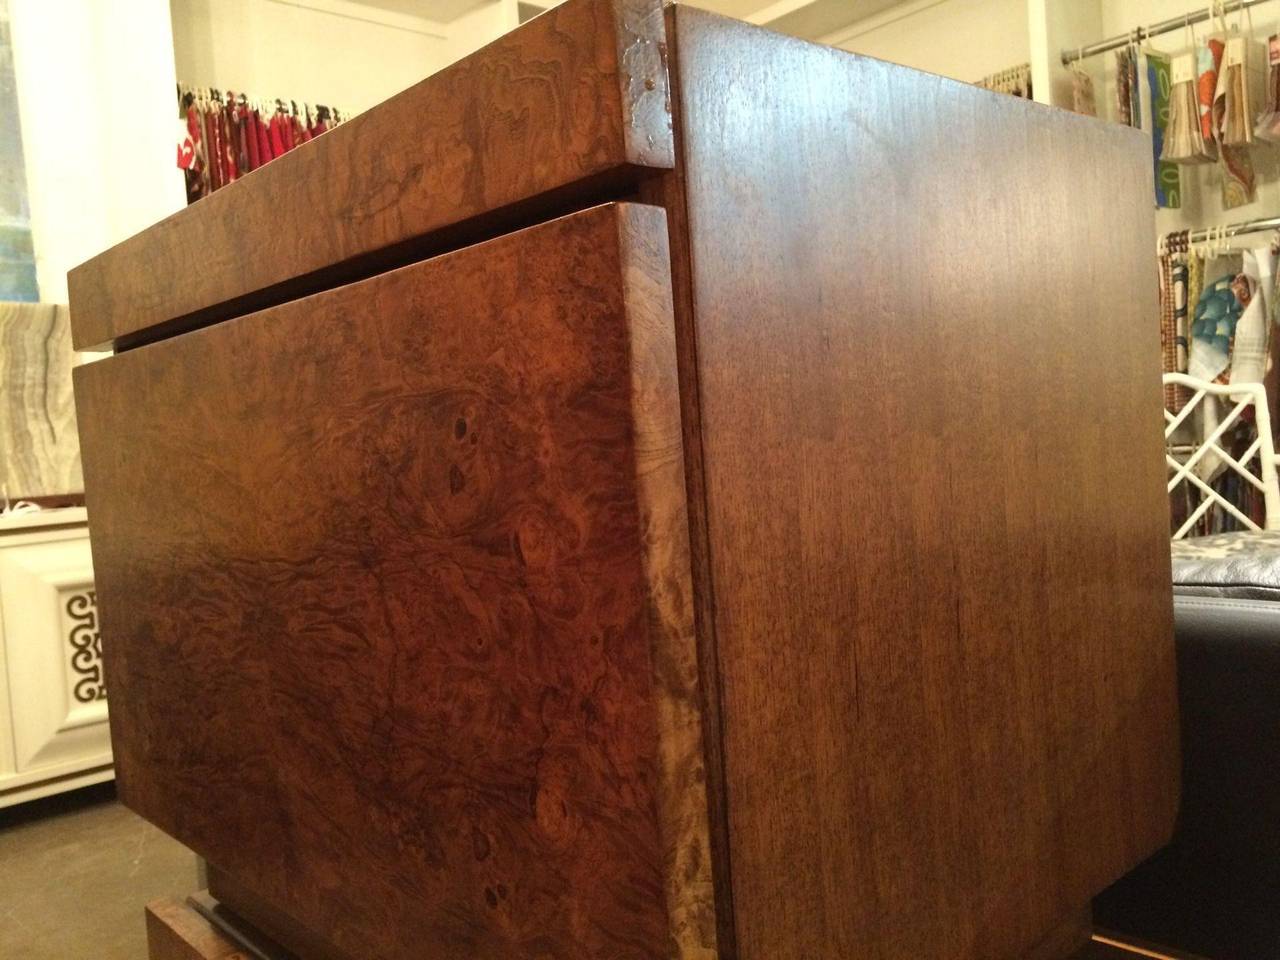 Pair of handsome nightstands by Lane Furniture Company with burl wood flat door front panels. Each nightstand has a pull-out ledge for extra surface area and one large drawer. The nightstands are in good vintage condition with minor scratch on top